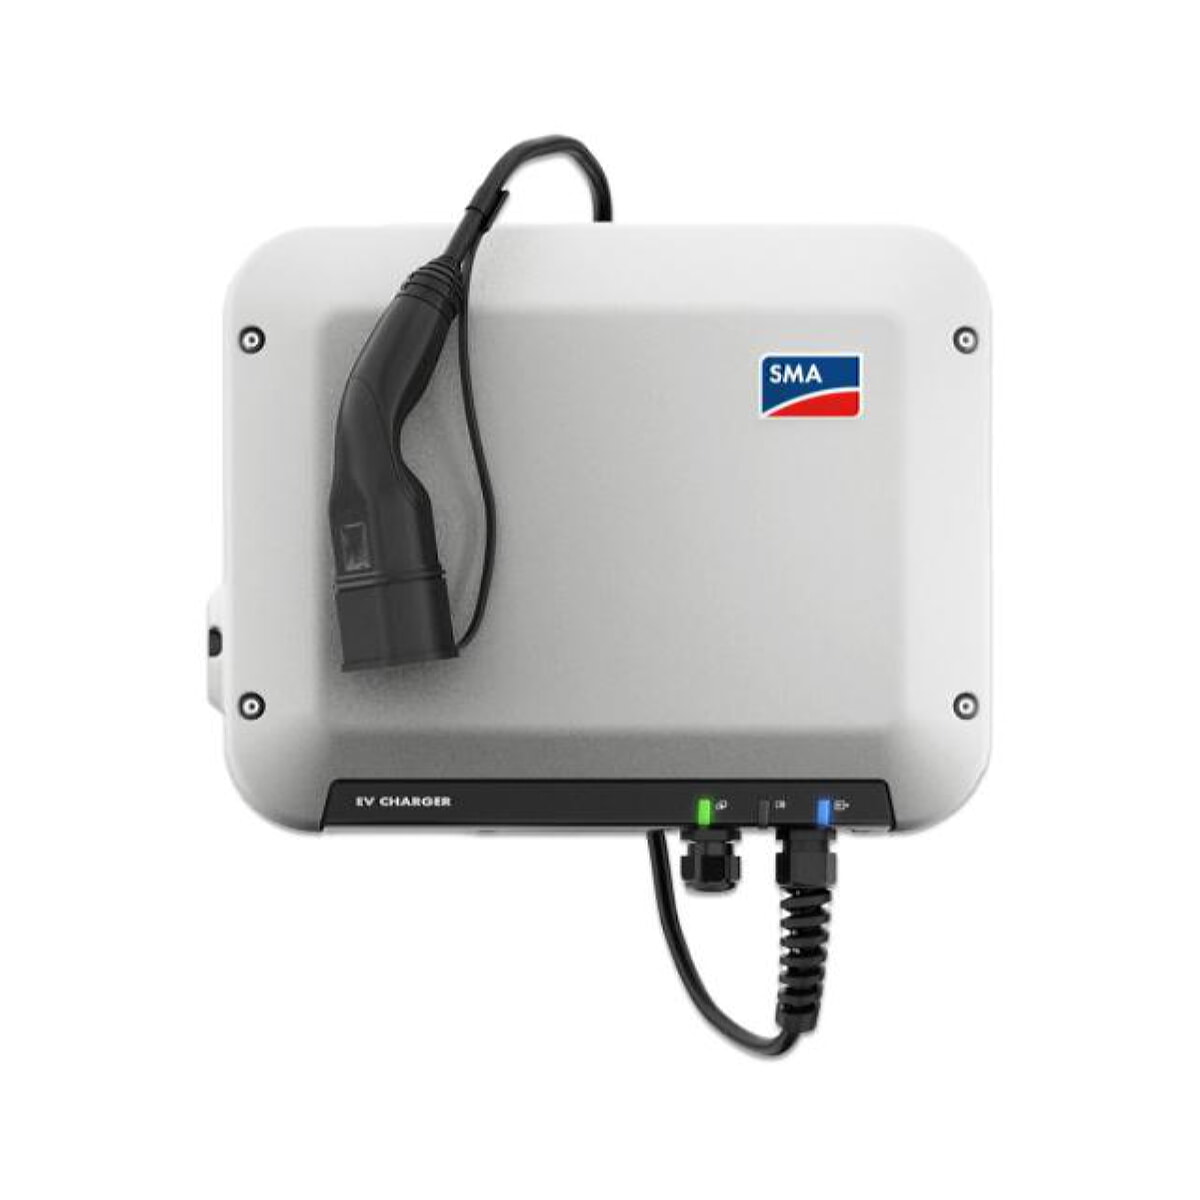 SMA EV CHARGER 22 Three-phase AC charging station with 7.5 m charging cable